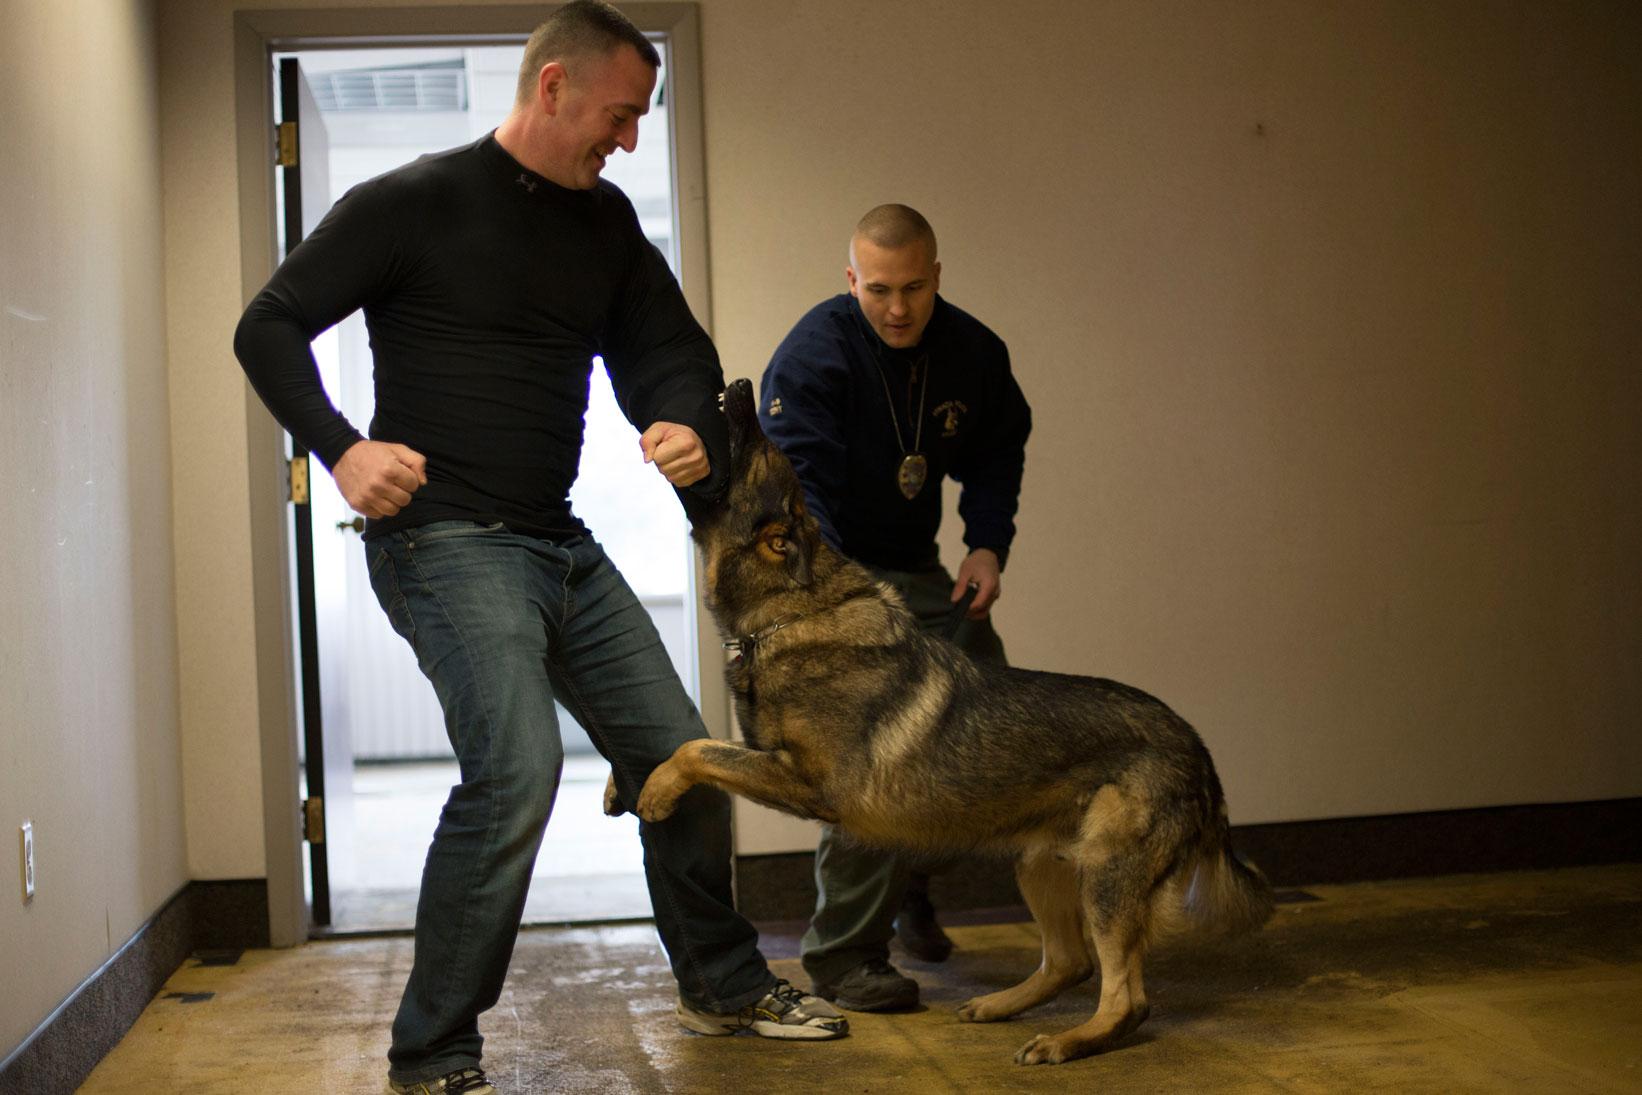 Tucker Mitchell/ The Ithacan In this training exercise March 28,  Officer Jordan Papkov struggles with Bert, who has bitten into the officer's arm guard. Bert has been trained to aid arrests by immobilizing suspects.